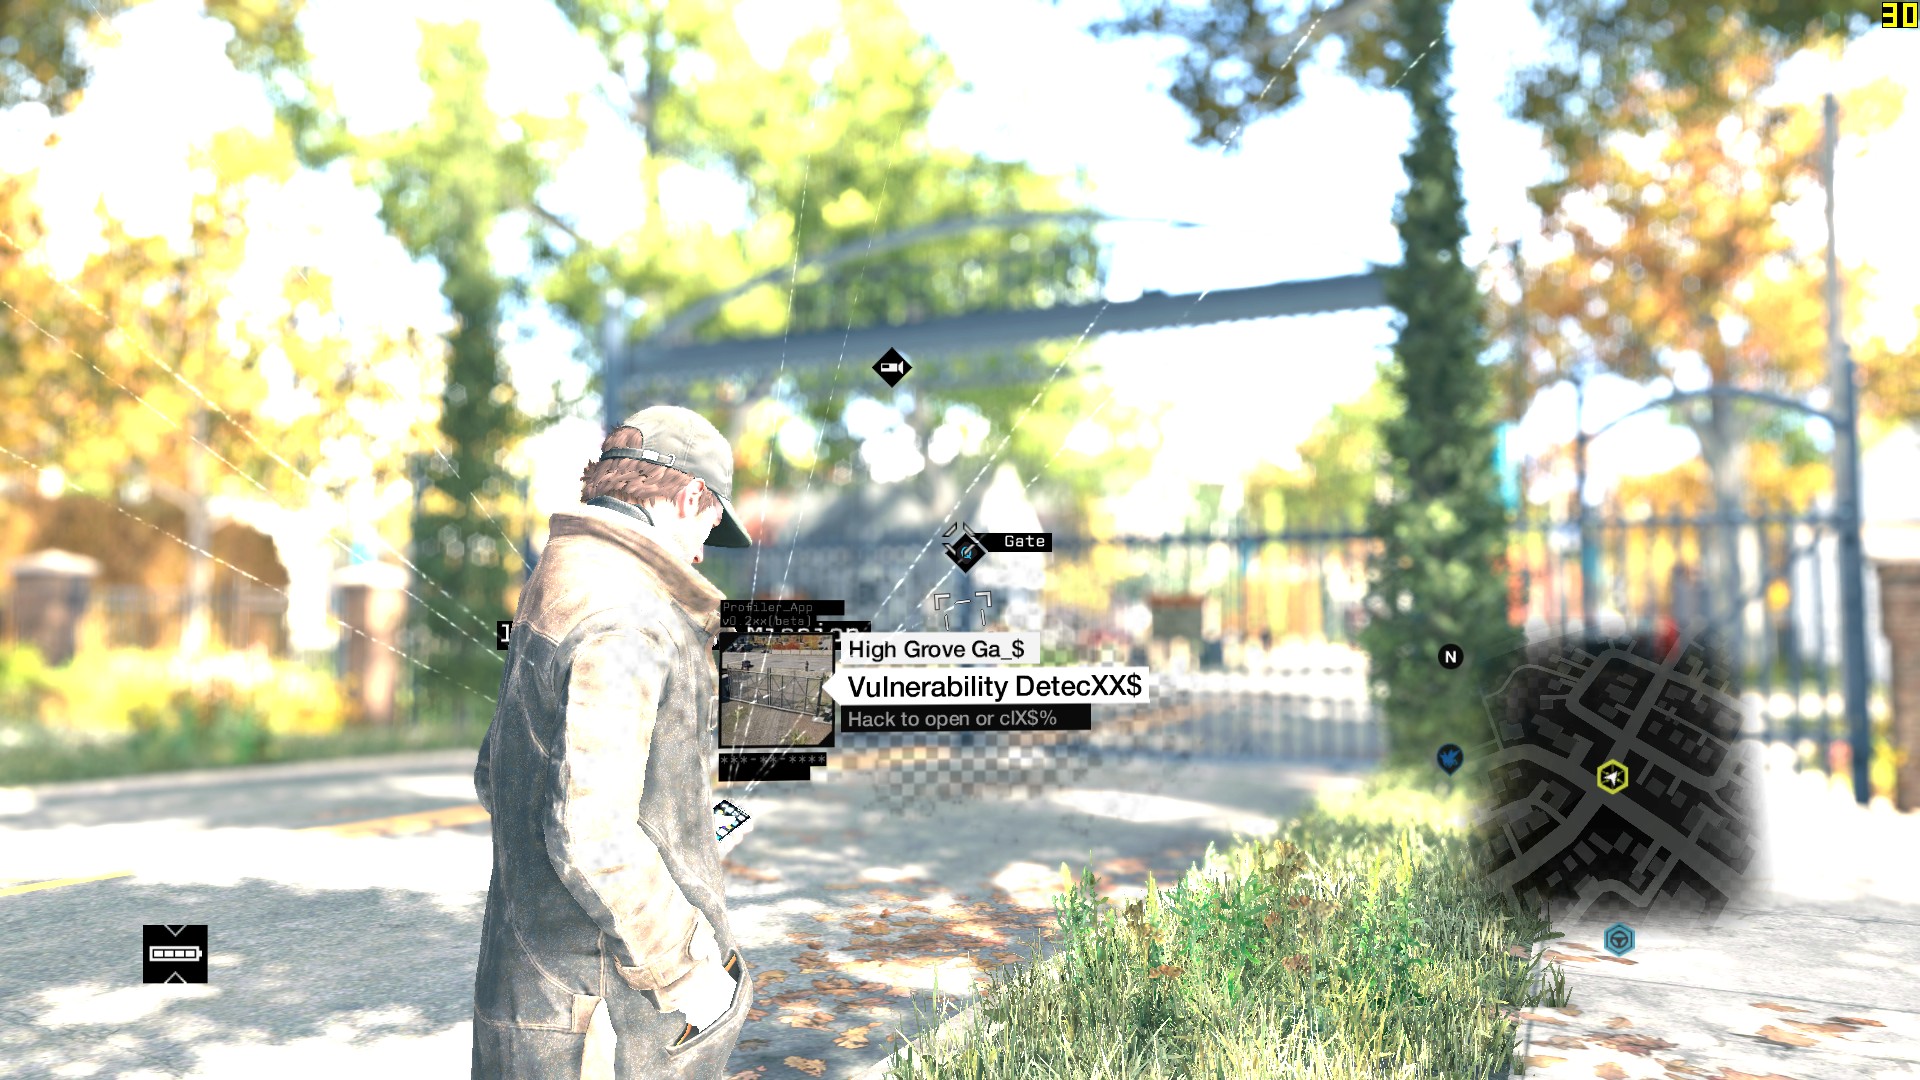 watch_dogs 2014-05-29 21-59-26-01